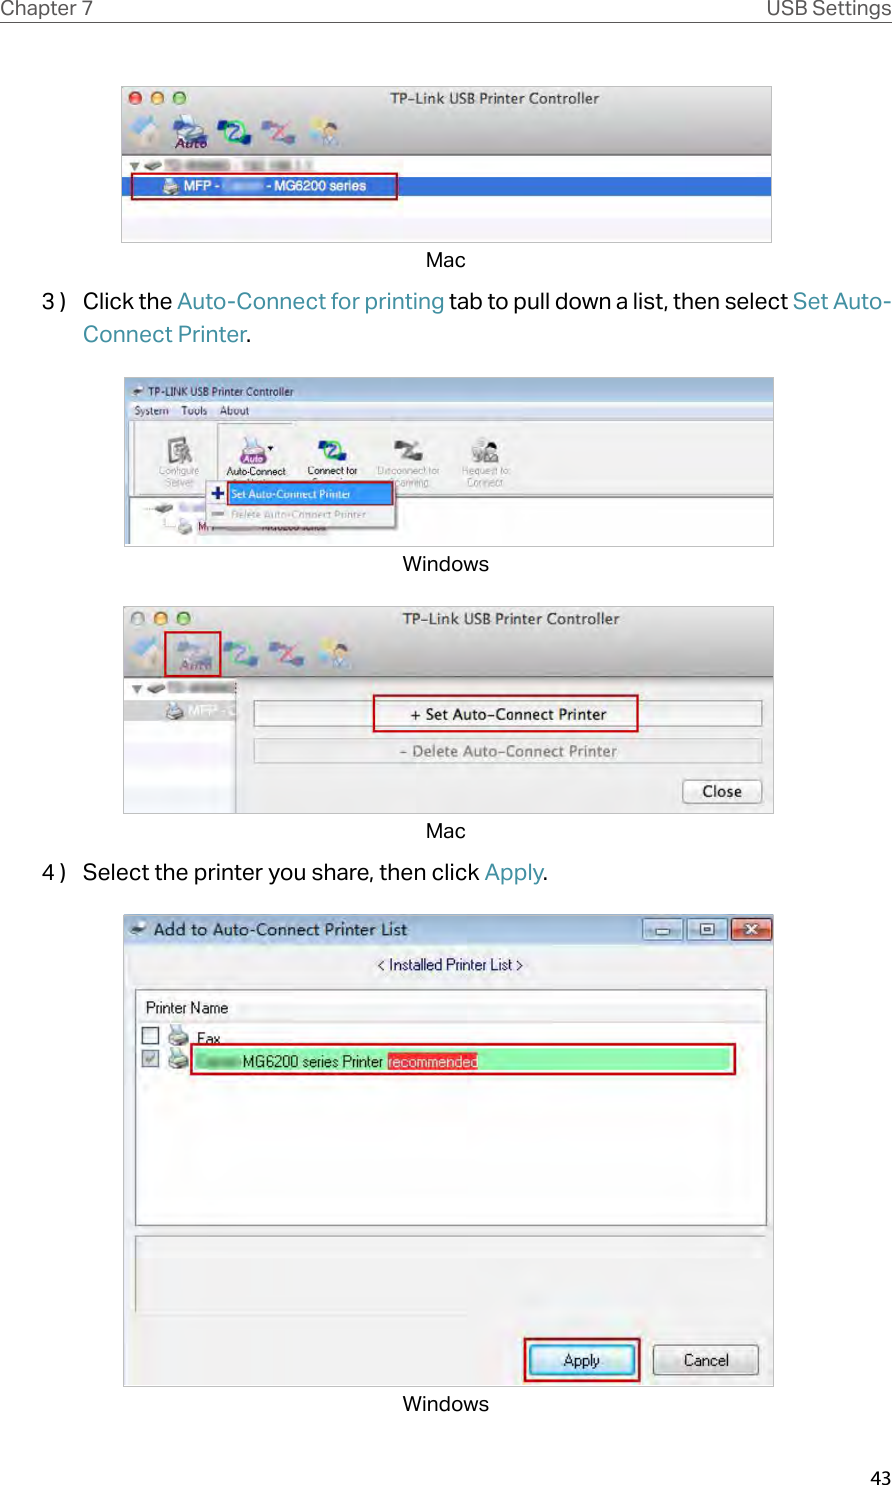 43Chapter 7 USB SettingsMac3 )  Click the Auto-Connect for printing tab to pull down a list, then select Set Auto-Connect Printer. Windows Mac4 )  Select the printer you share, then click Apply. Windows